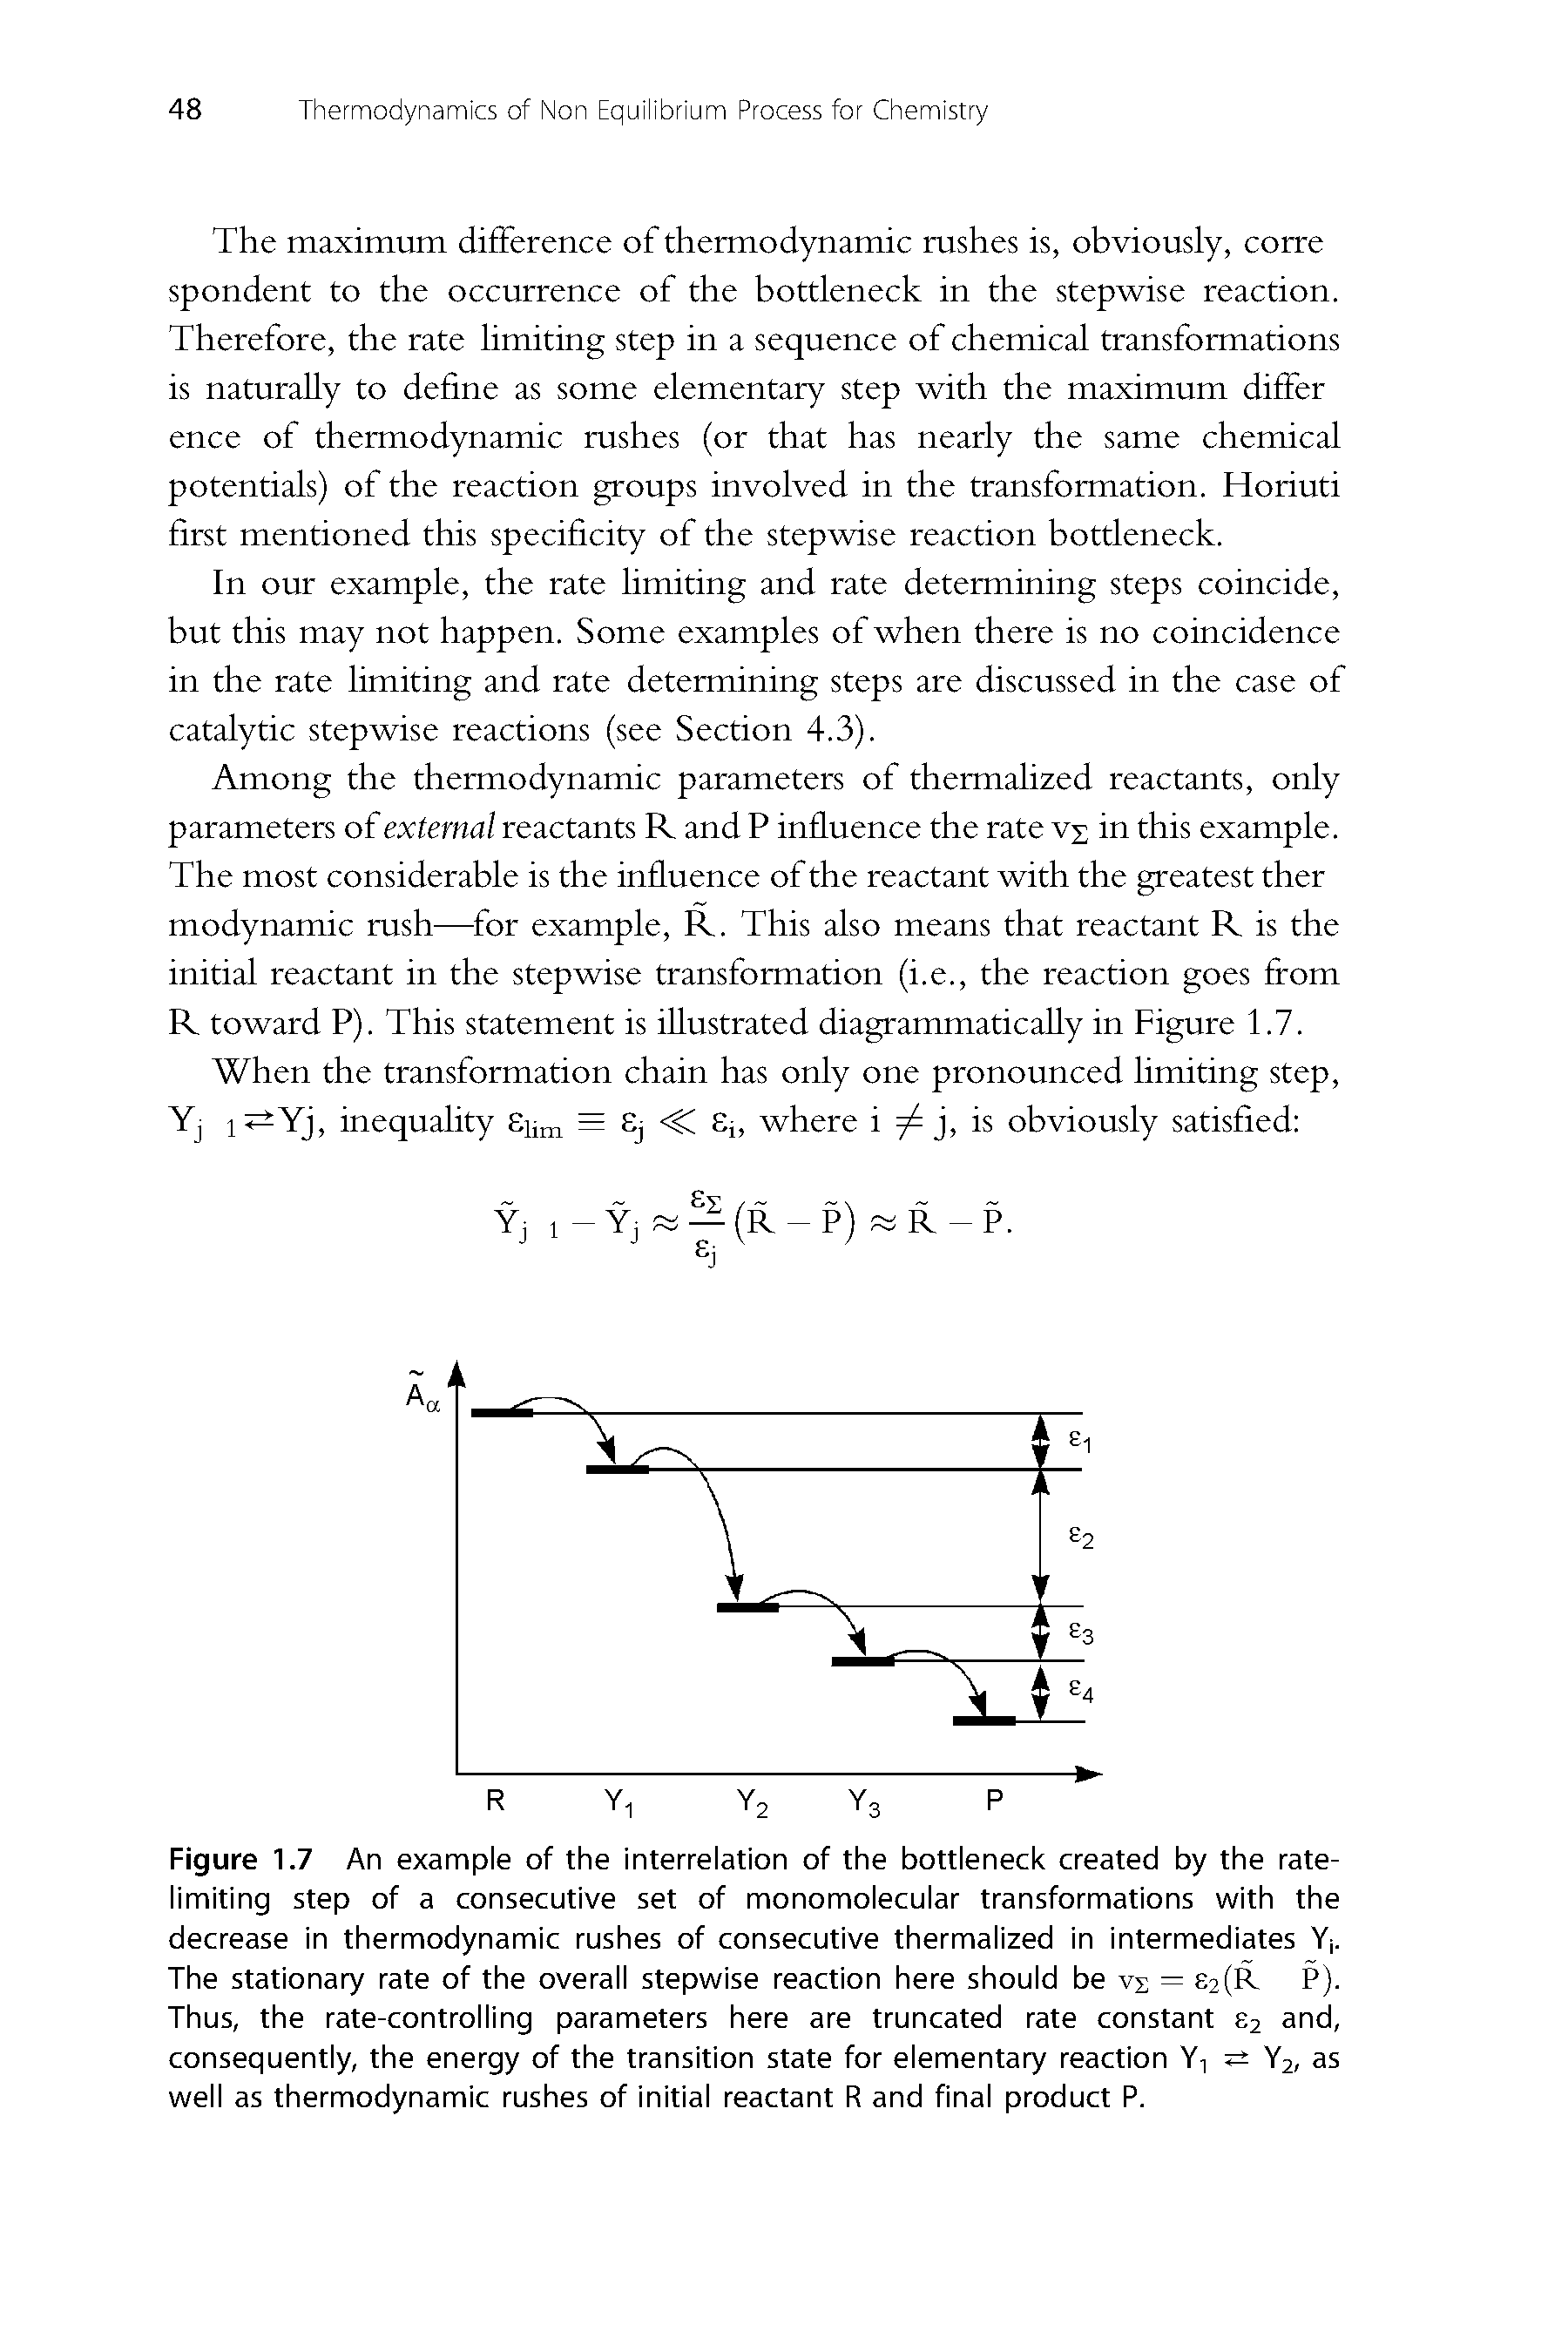 Figure 1.7 An example of the interrelation of the bottleneck created by the rate-limiting step of a consecutive set of monomolecular transformations with the decrease in thermodynamic rushes of consecutive thermalized in intermediates Y. The stationary rate of the overall stepwise reaction here should be VE = 2(R P).